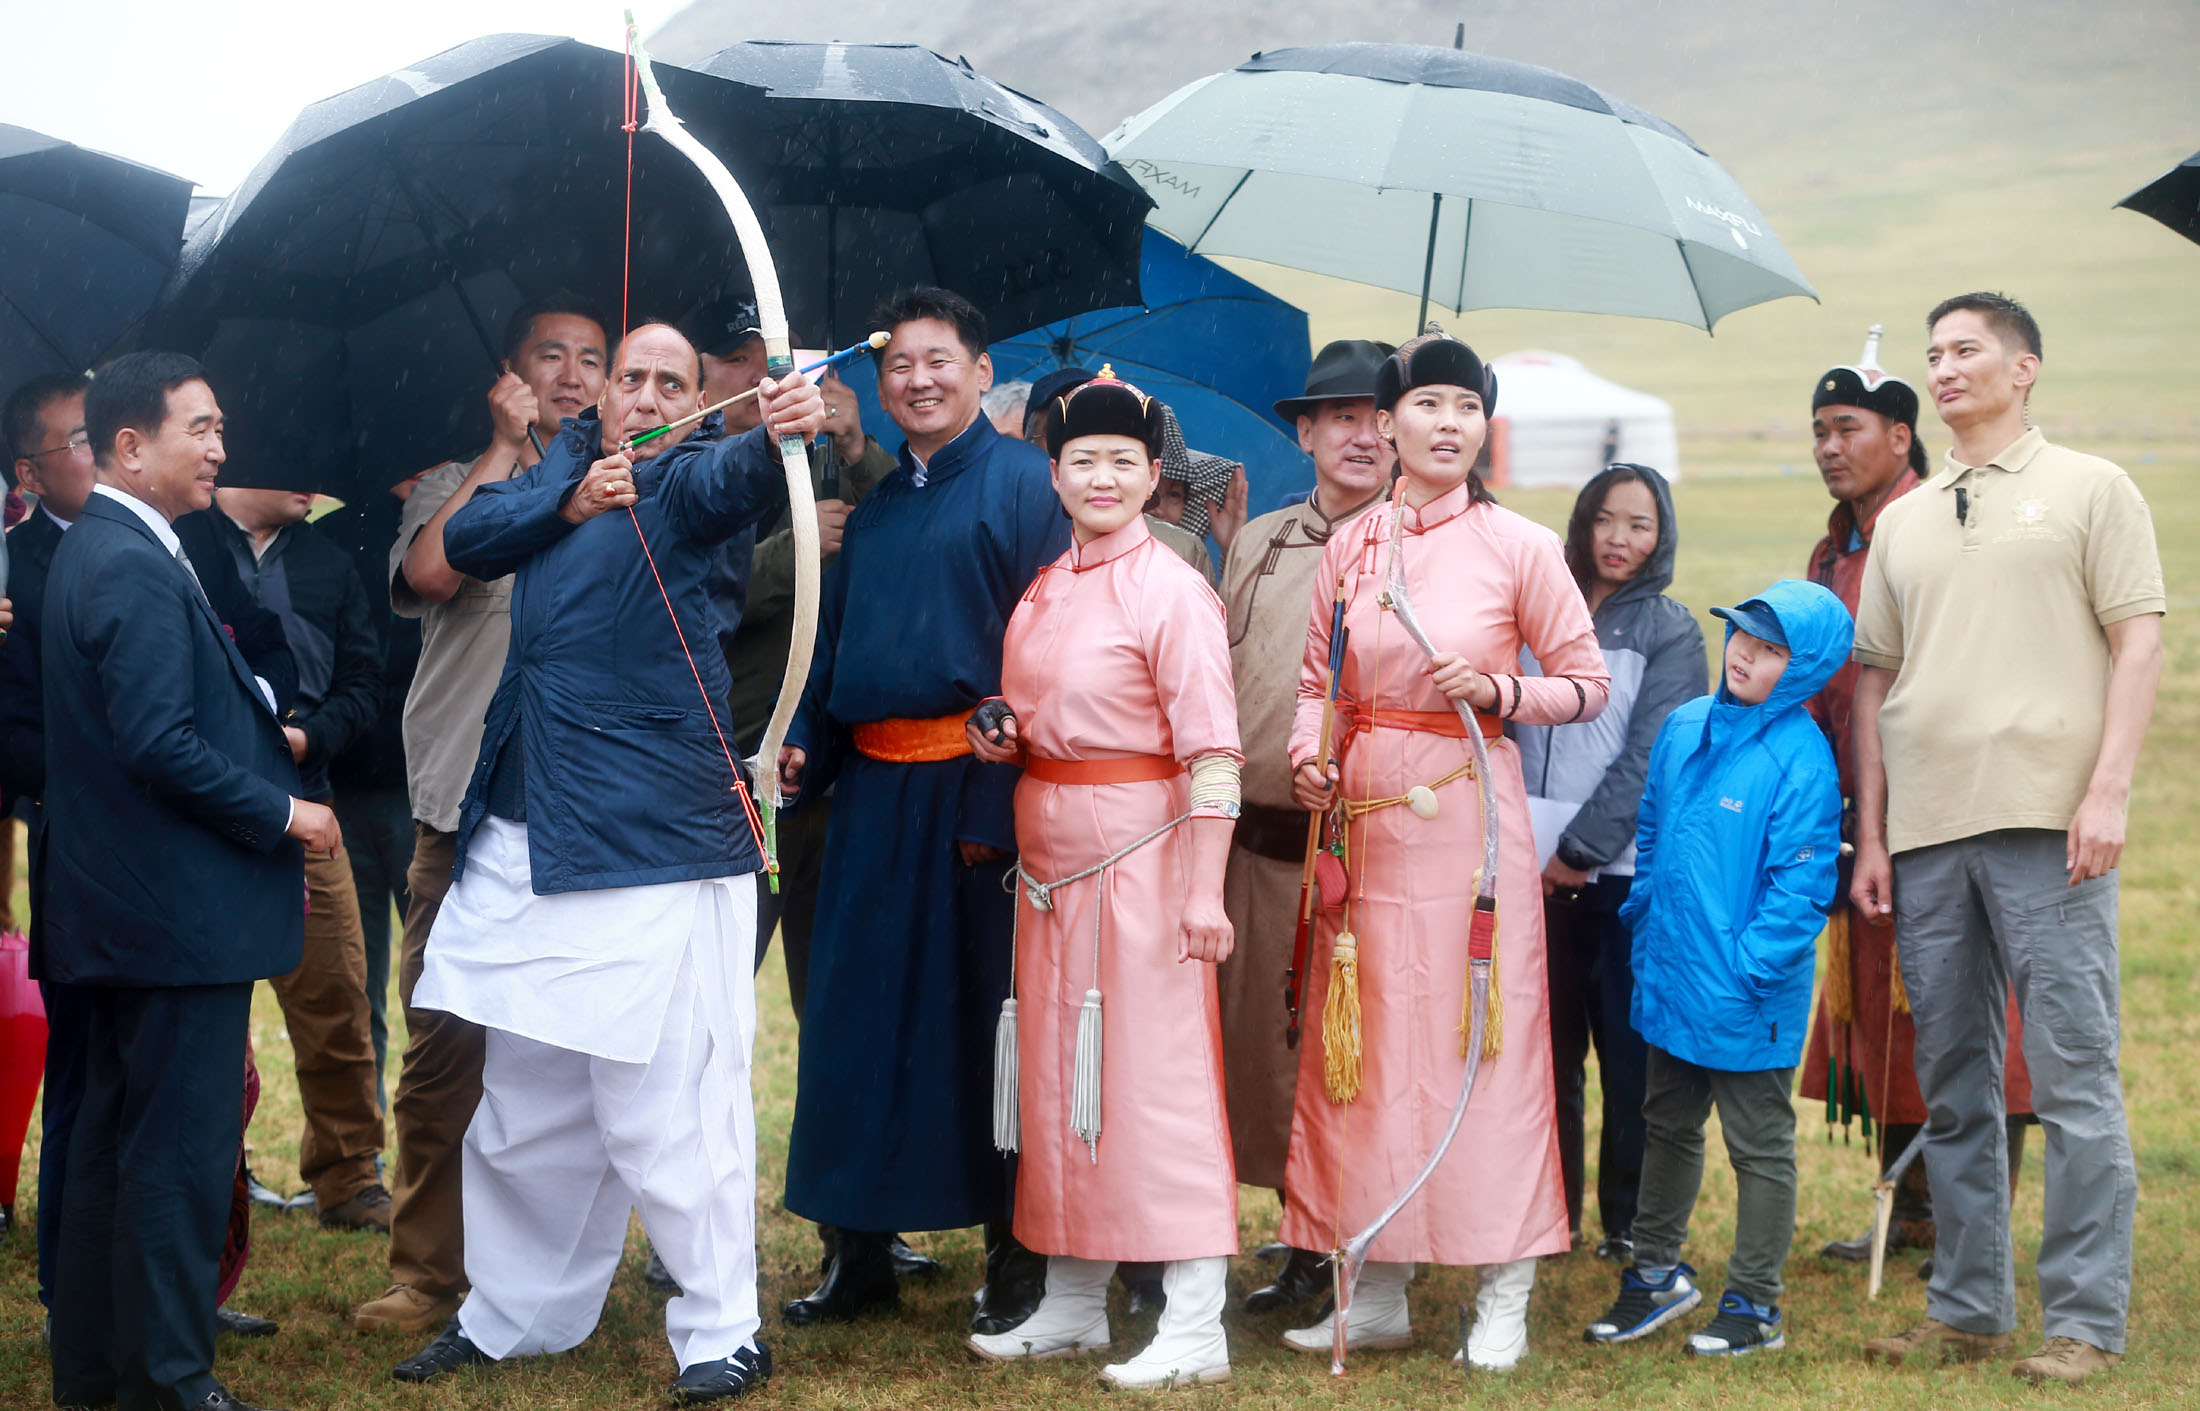 The Union Home Minister, Shri Rajnath Singh witnessing the Mini-Naadam festival of traditional sports and culture organised in the rural areas of Ulaanbaatar, in Mongolia on June 23, 2018.   The Prime Minister of Mongolia, Mr. Ukhnaagin Khurelsukh is also seen.